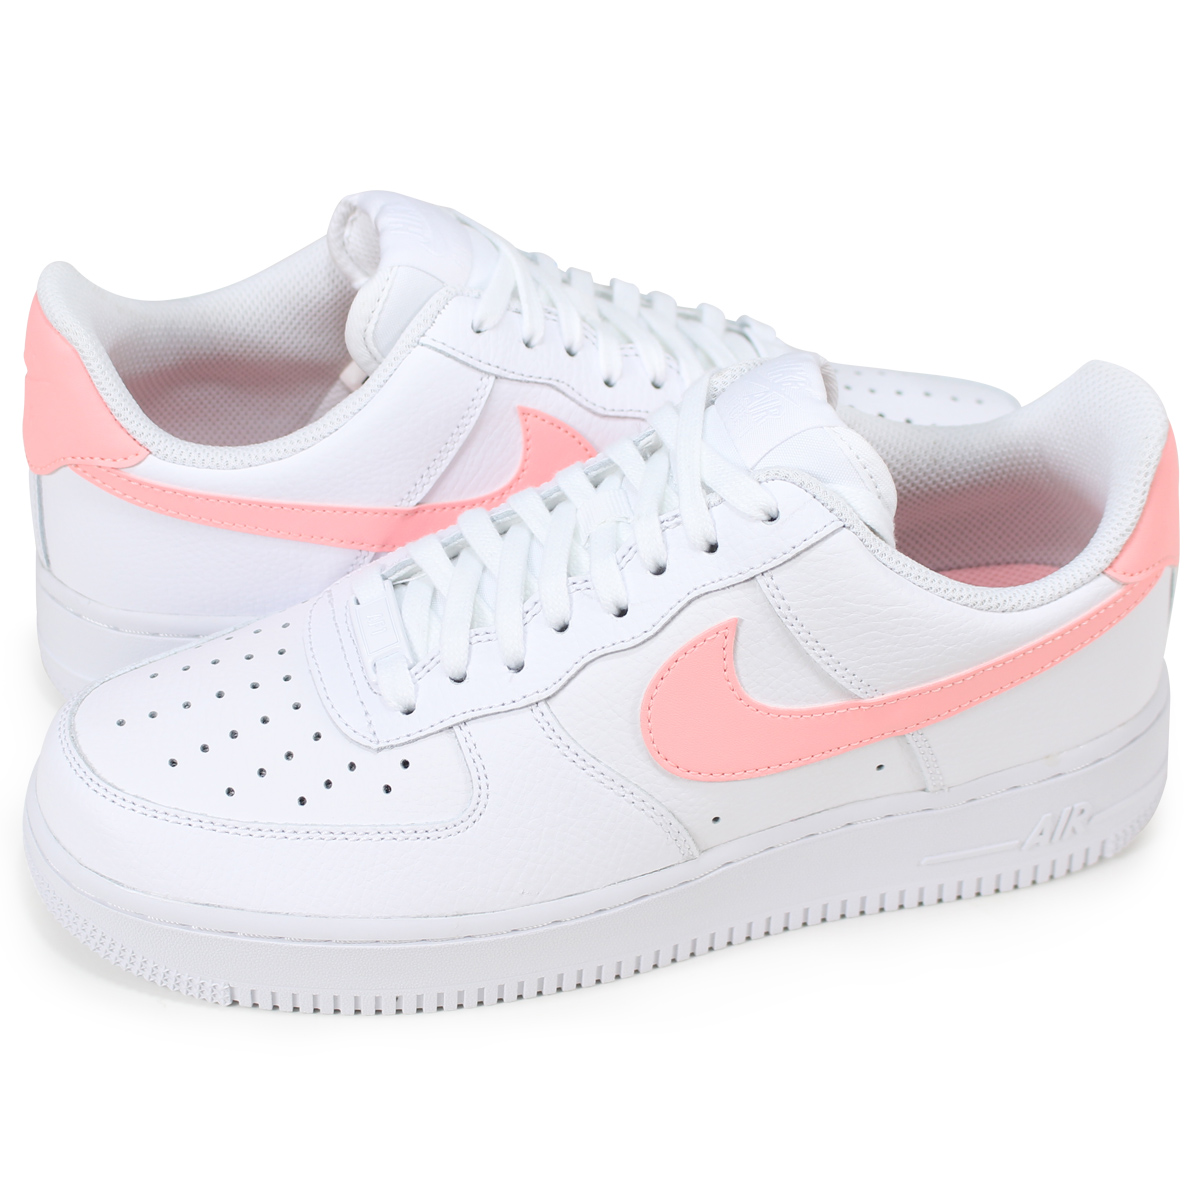 nike air force 1 oracle pink and white